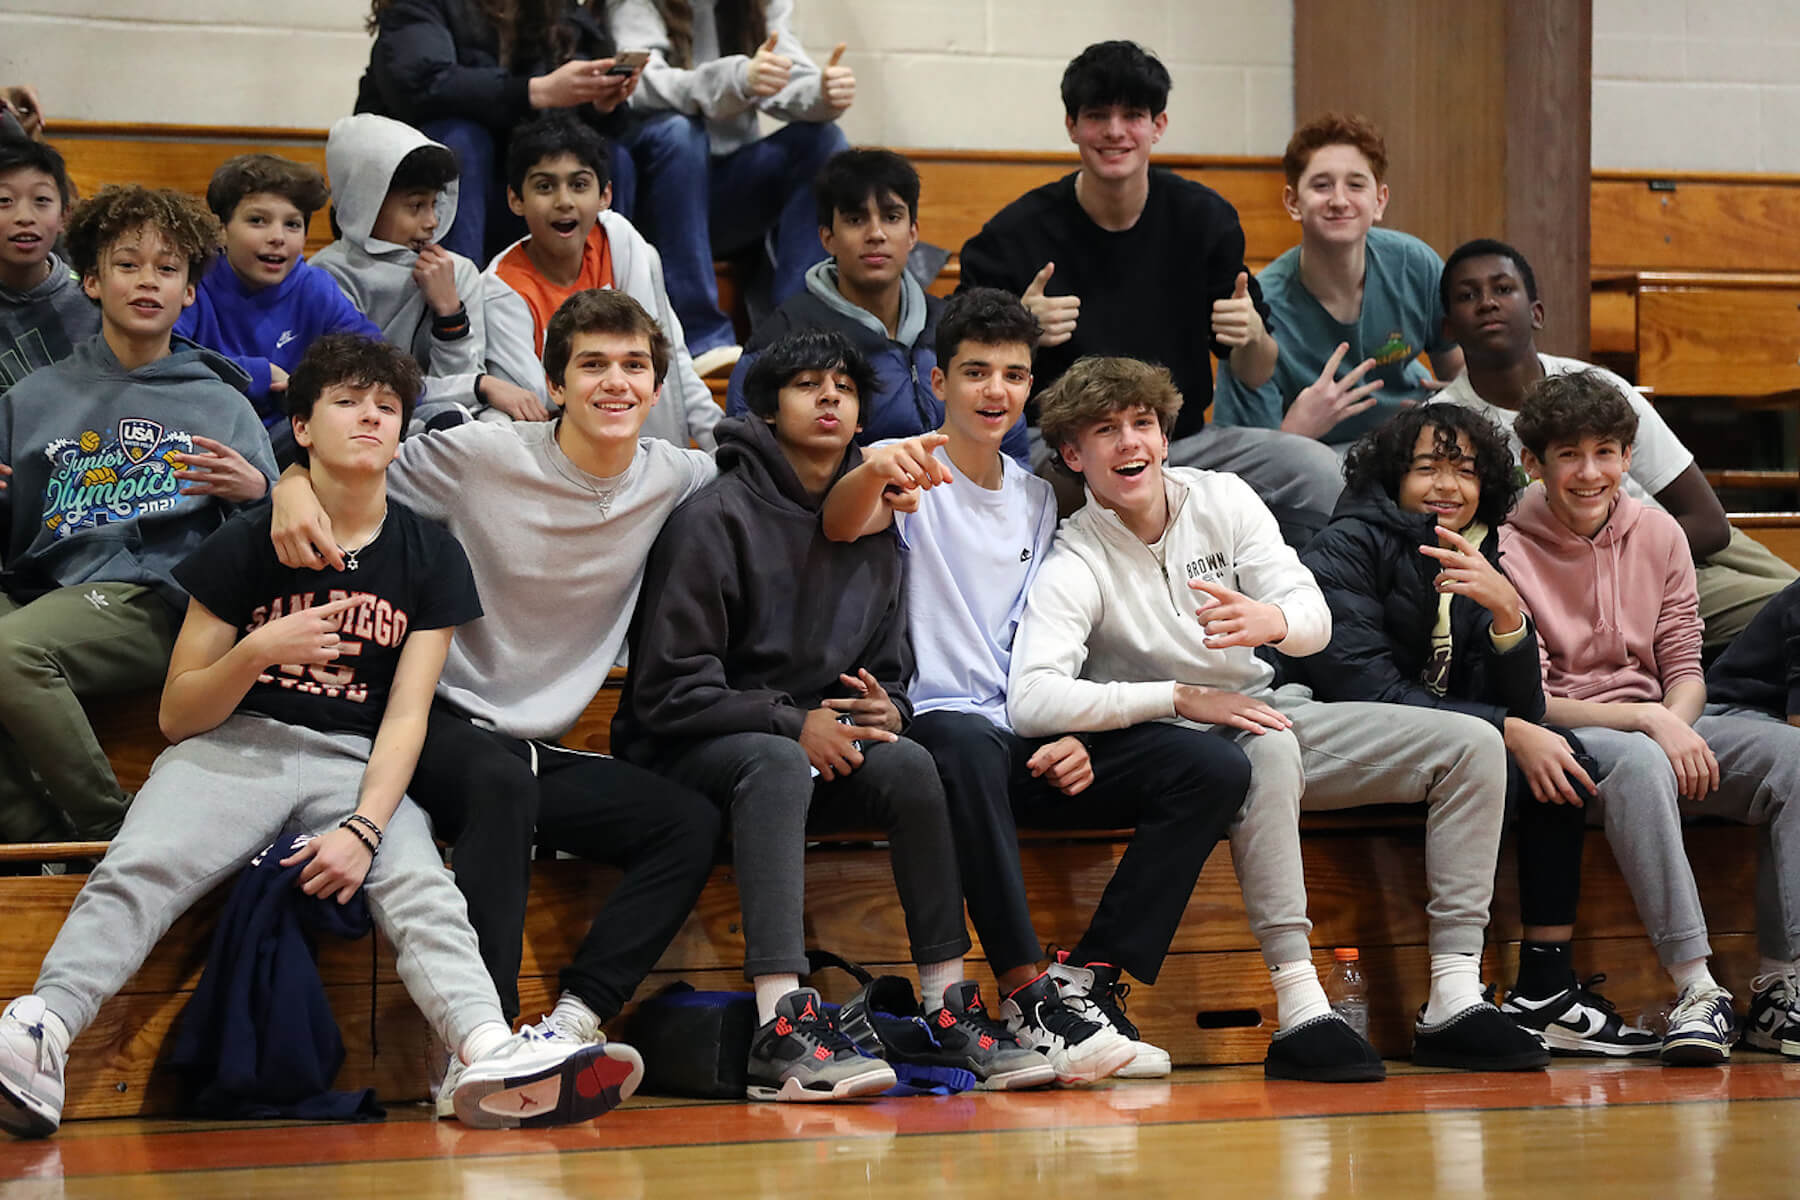 ECFS students cheer on basketball teams from the bleachers and smile at the camera.